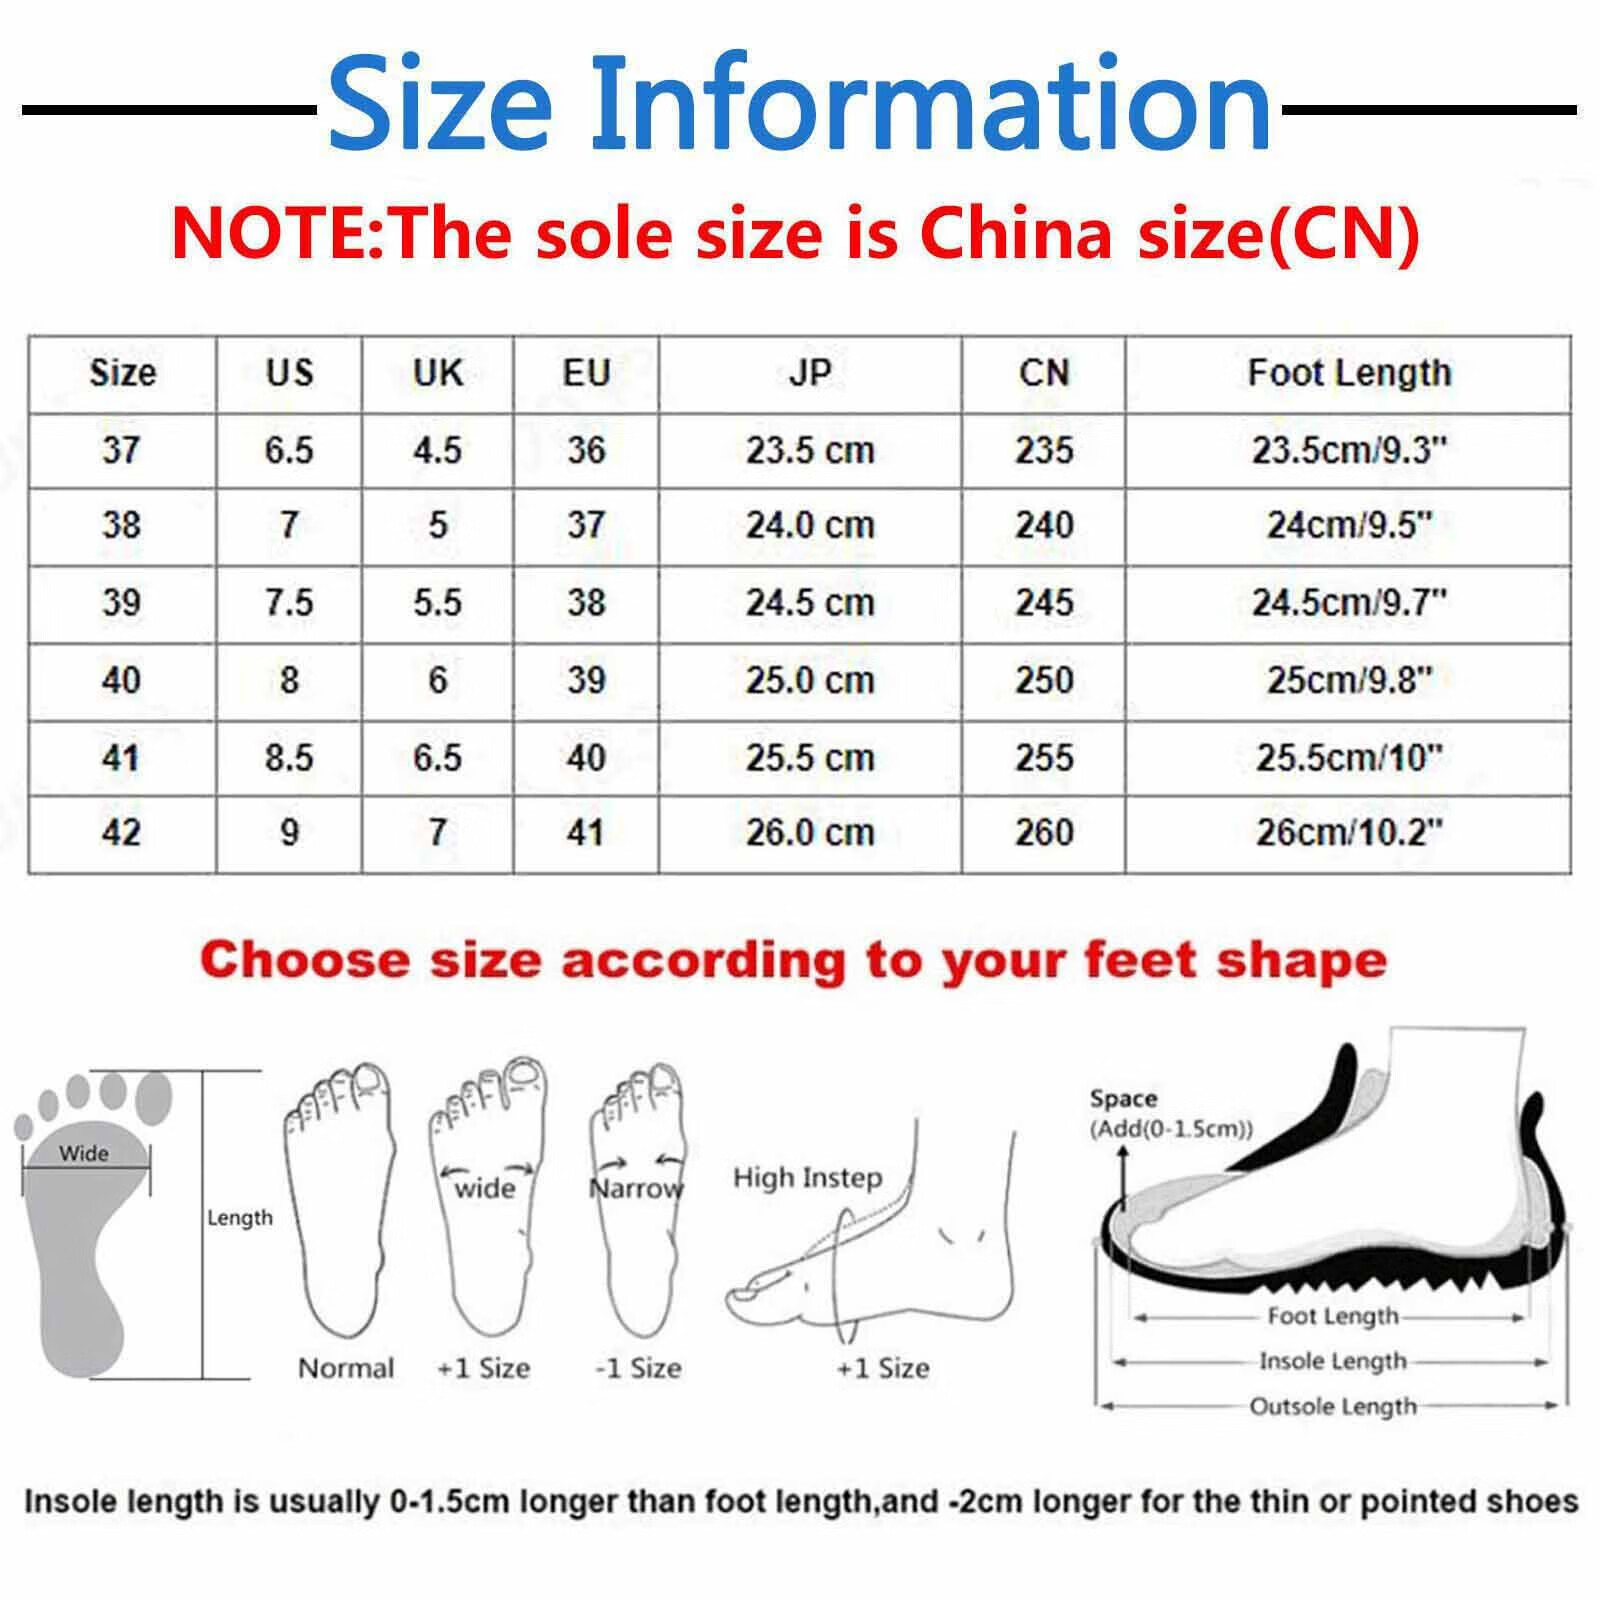 Casual Shoes for Women Women'S Canvas Dance Shoes Soft Soled Training Shoes Ballet Shoes Casual Sandals Dance Shoes Women Casual Shoes Canvas Blue 37 - image 4 of 6